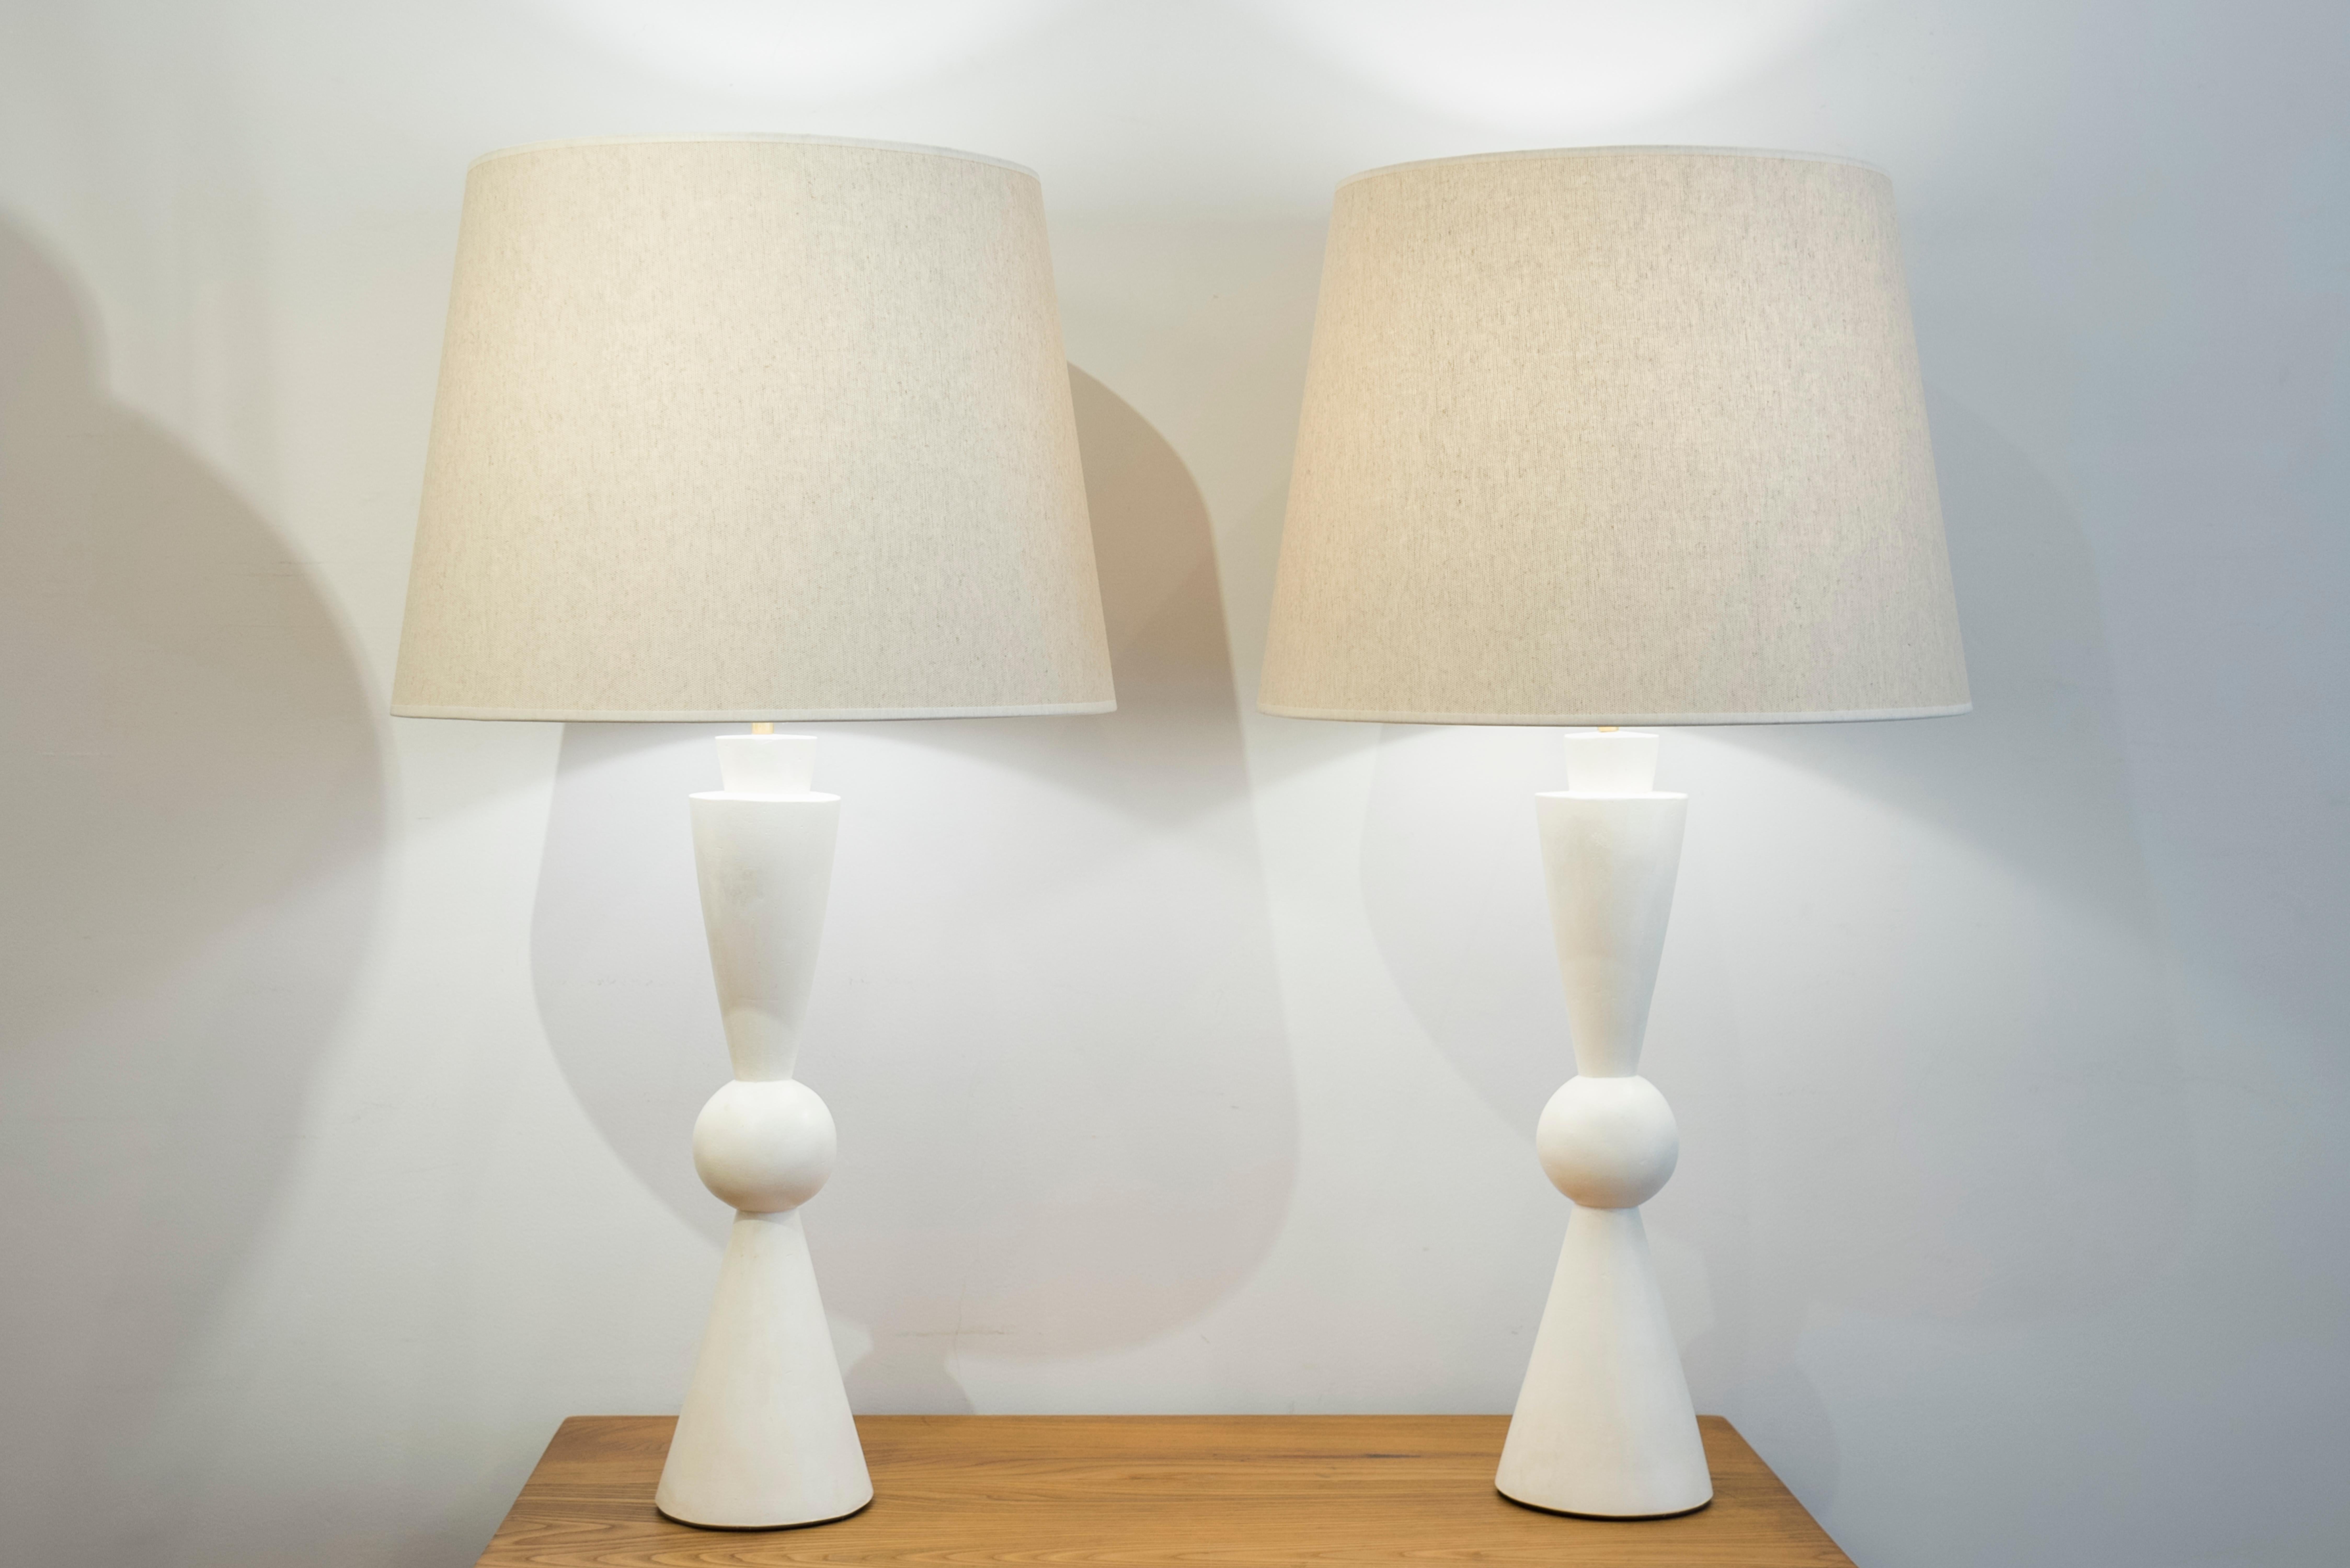 A pair of stuccoed plaster lamps, inspired by Jean-Michel Frank
Model: Quille
France, contemporary creation.

Dimensions:
Height total 84 cm (33.07 inches)
Height plaster foot 49 cm (19.29 inches)
Diameter 45 cm. (17.7 inches).